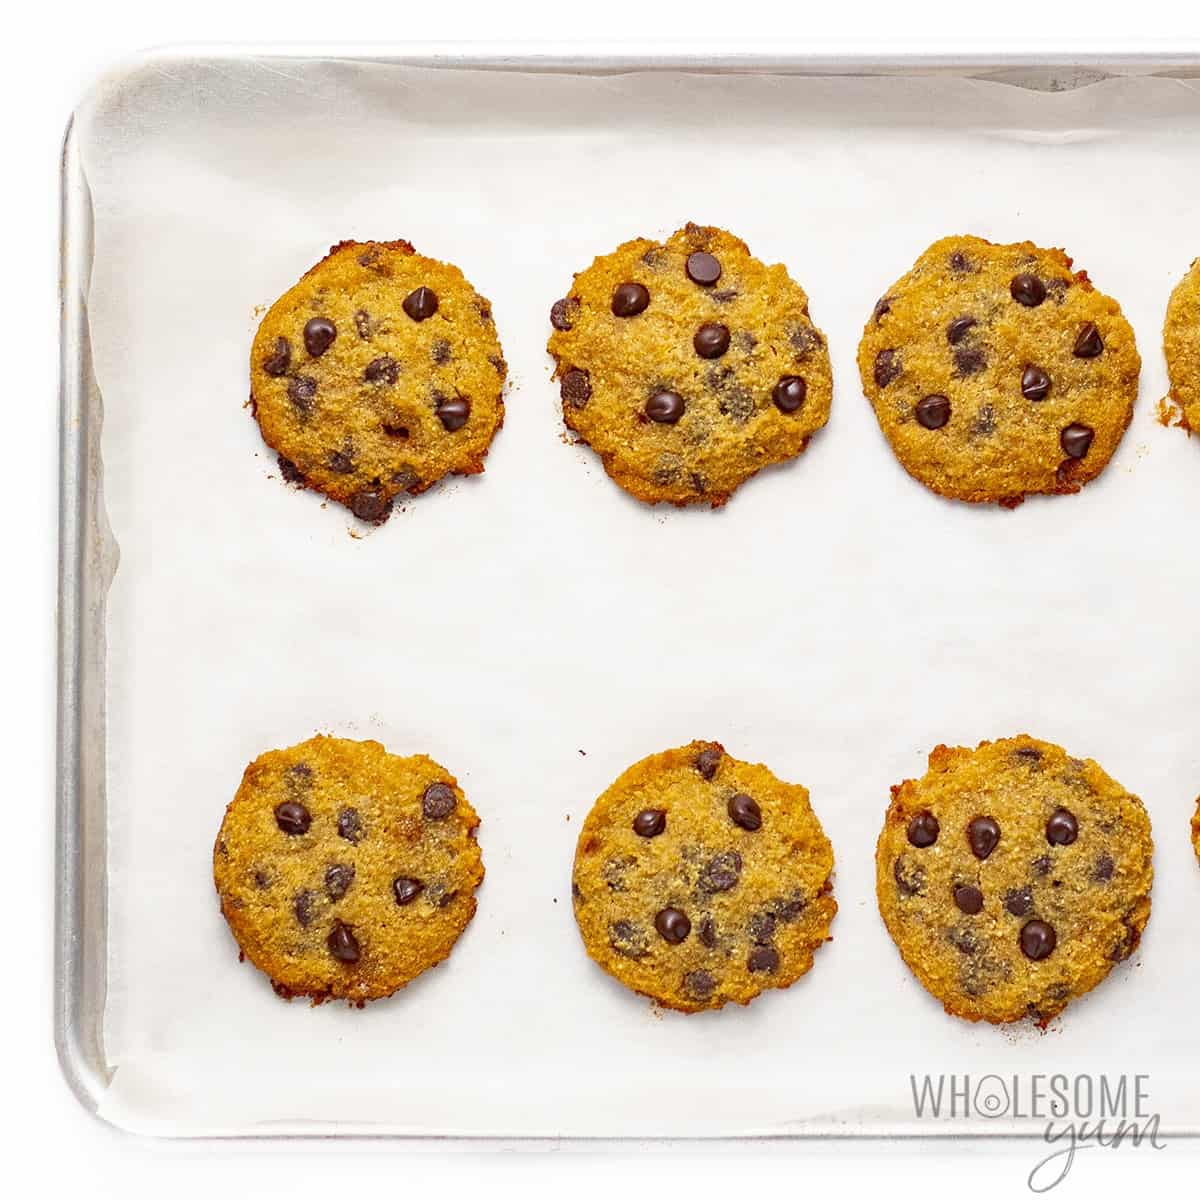 Fully baked coconut chocolate chip cookies on baking pan